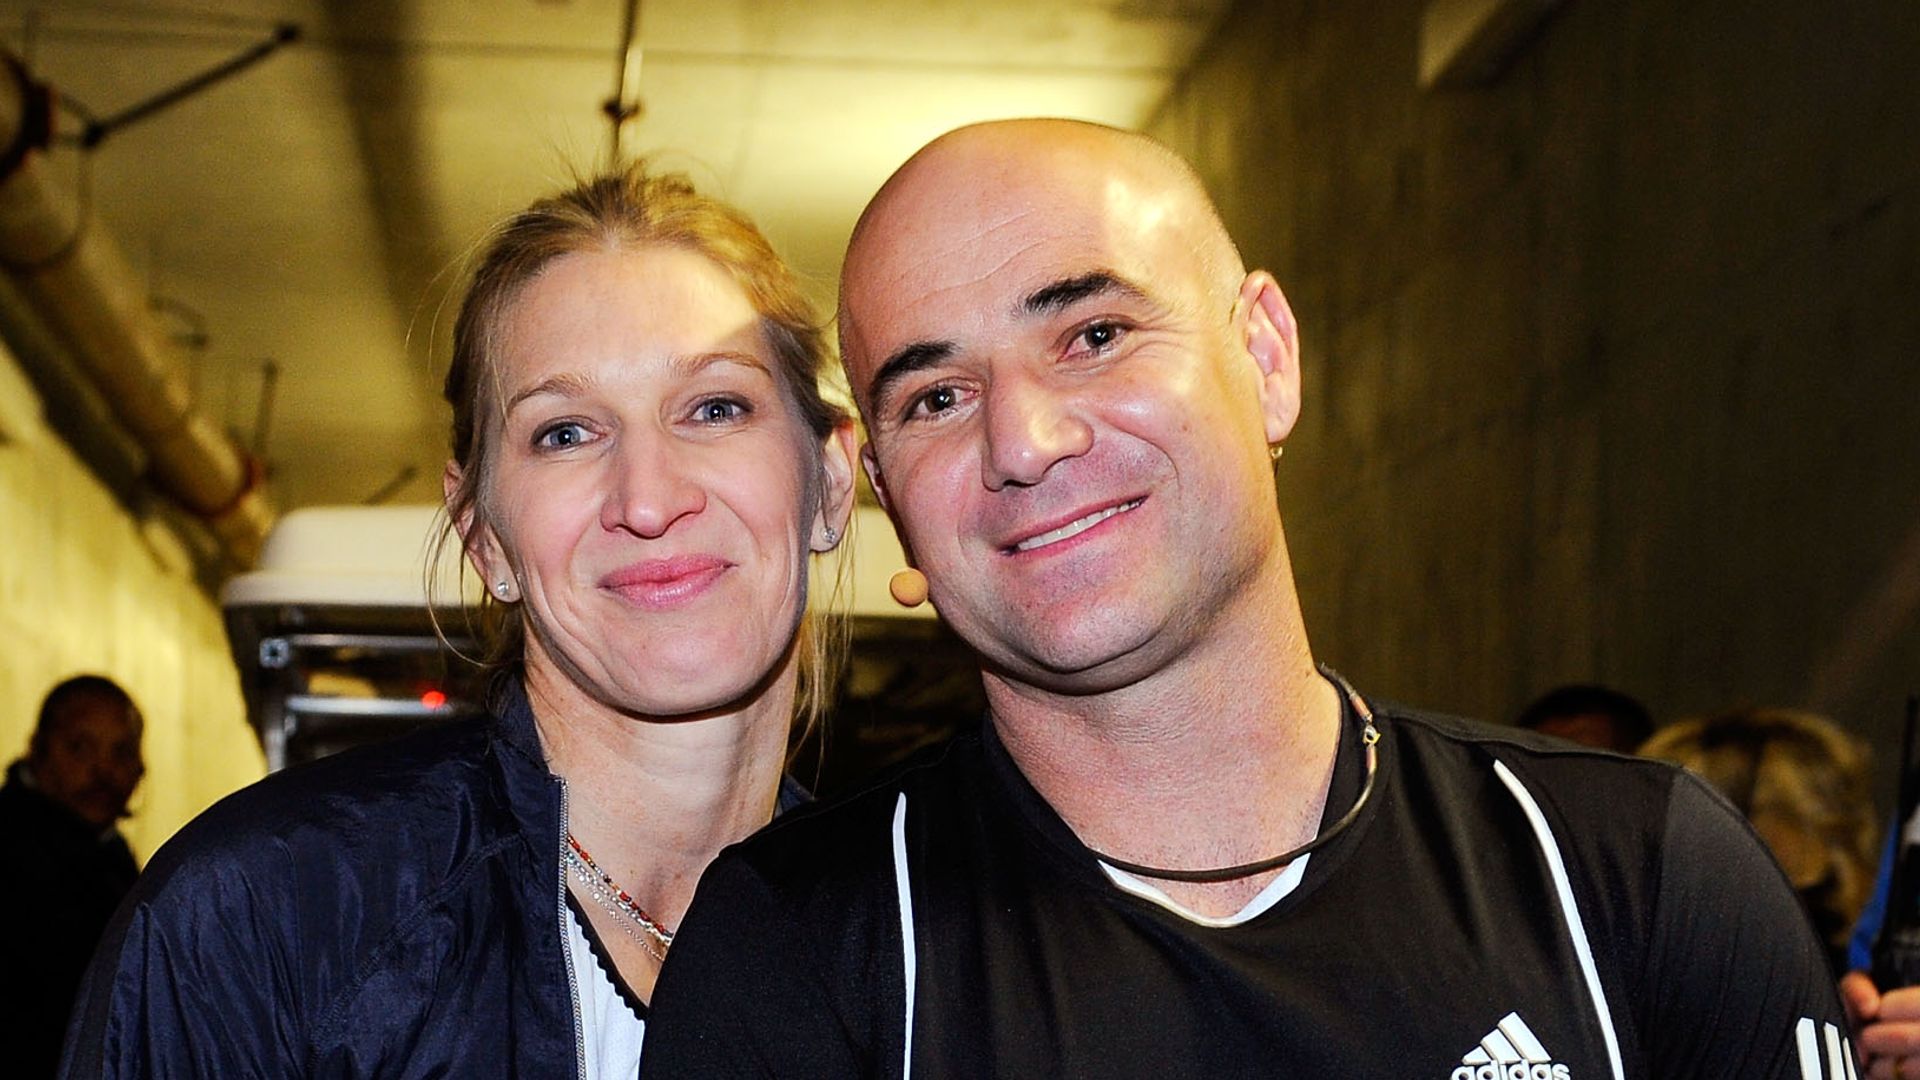 Andre Agassi reminisces about his wife Steffi Graf, whom he met at Wimbledon